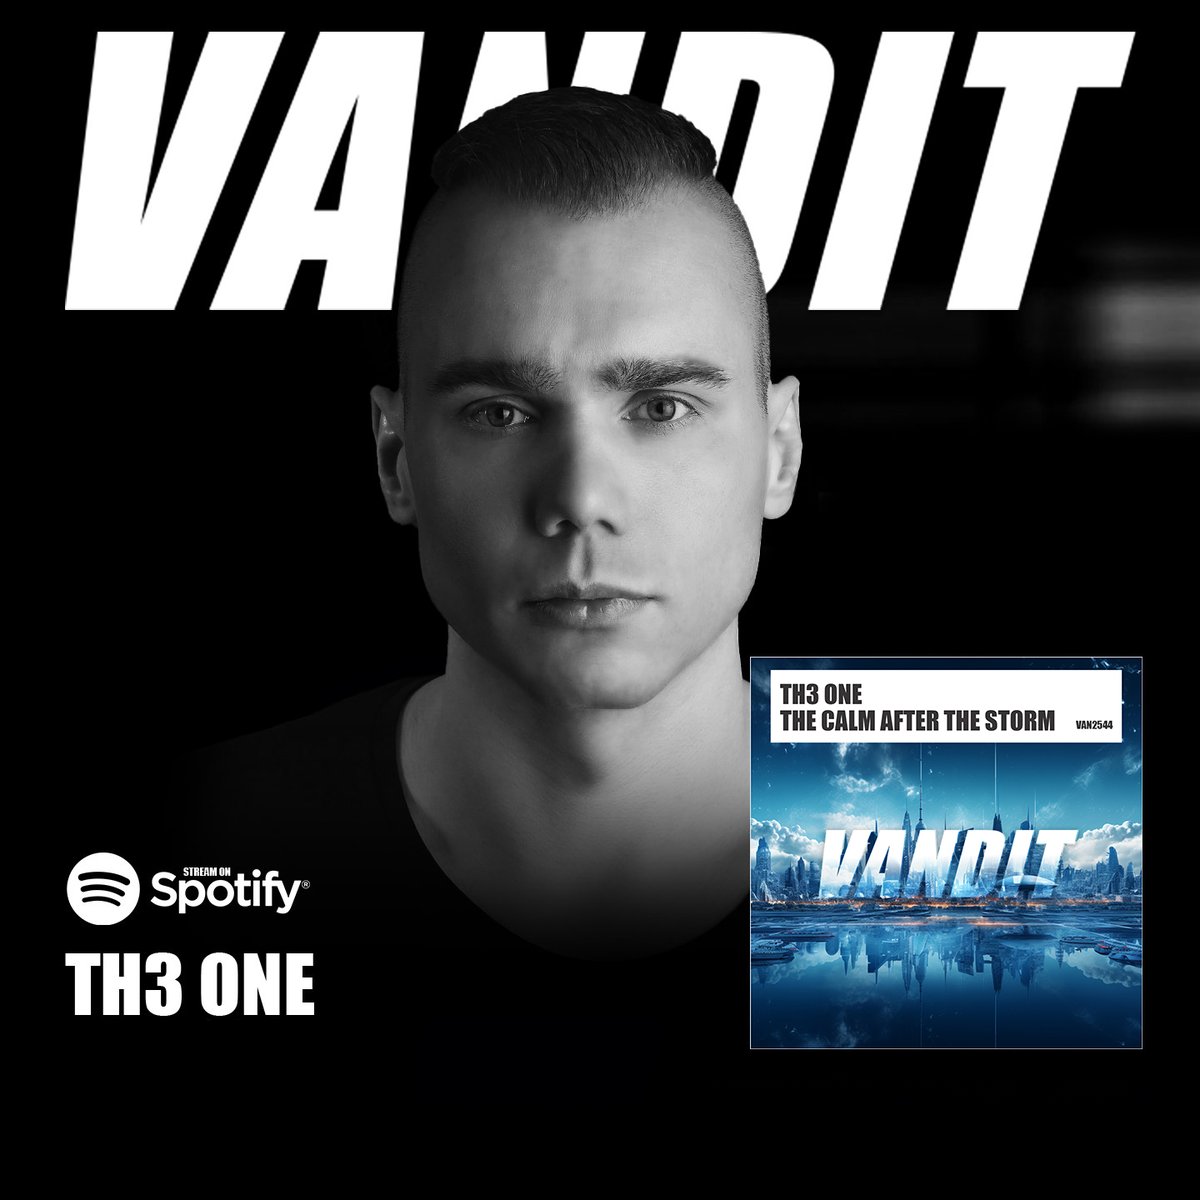 TH3 ONE- The Calm After The Storm / @vanditrecords 💙